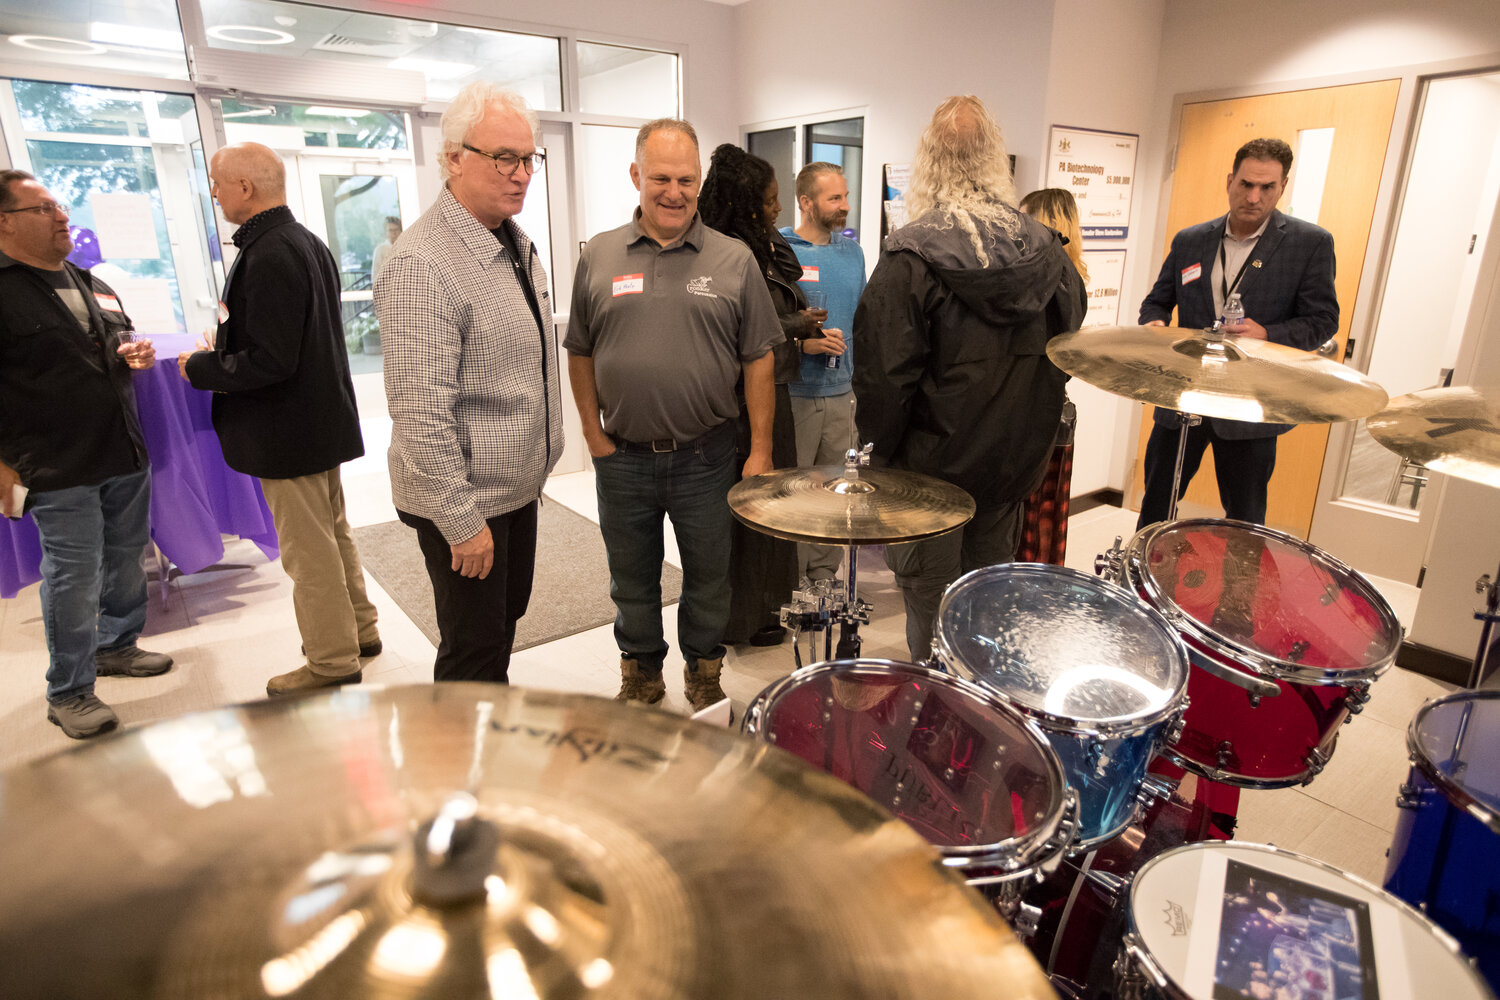 Erik Metz, right, of Croaker Percussion, and The Bucks County Music Project founder Richard Towey check out The Who drummer Zak Starkey's drum kit following the inaugural meeting of The Bucks County Music Project, held at the Pennsylvania Biotechnology Center of Bucks County in Buckingham.